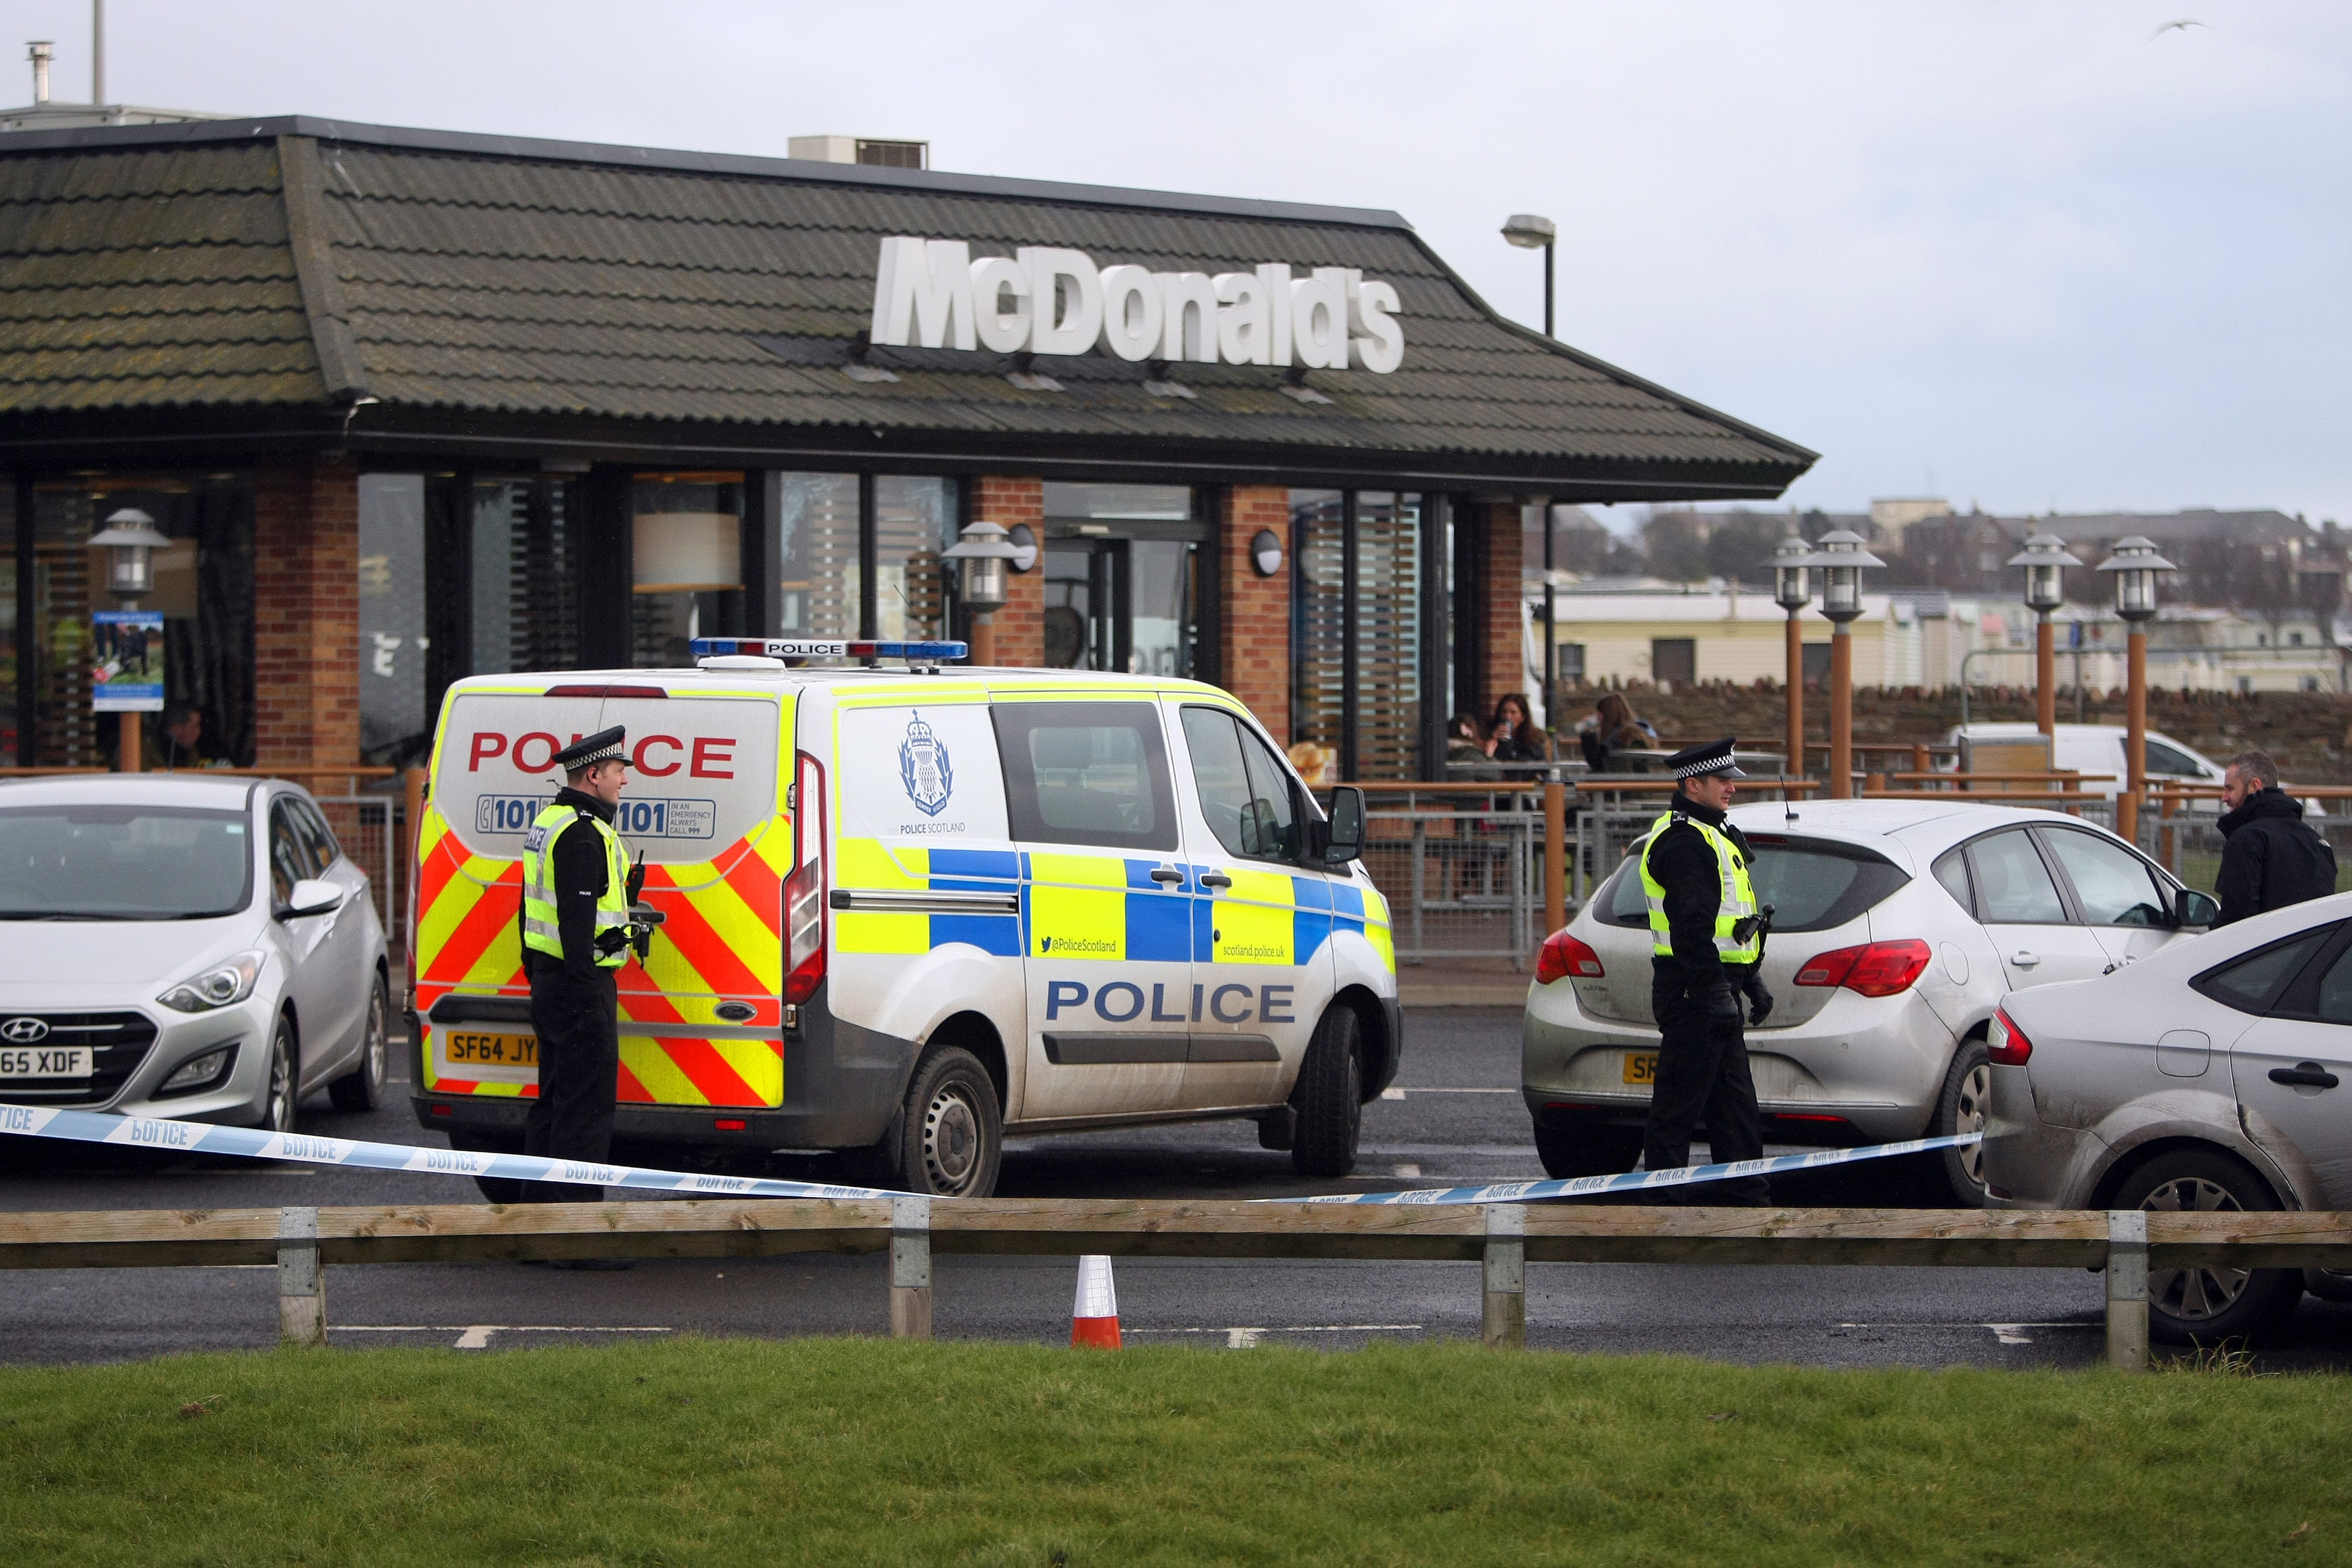 McDonald's Arbroath where five men were detained in connection with the ATM raid in Carnoustie.